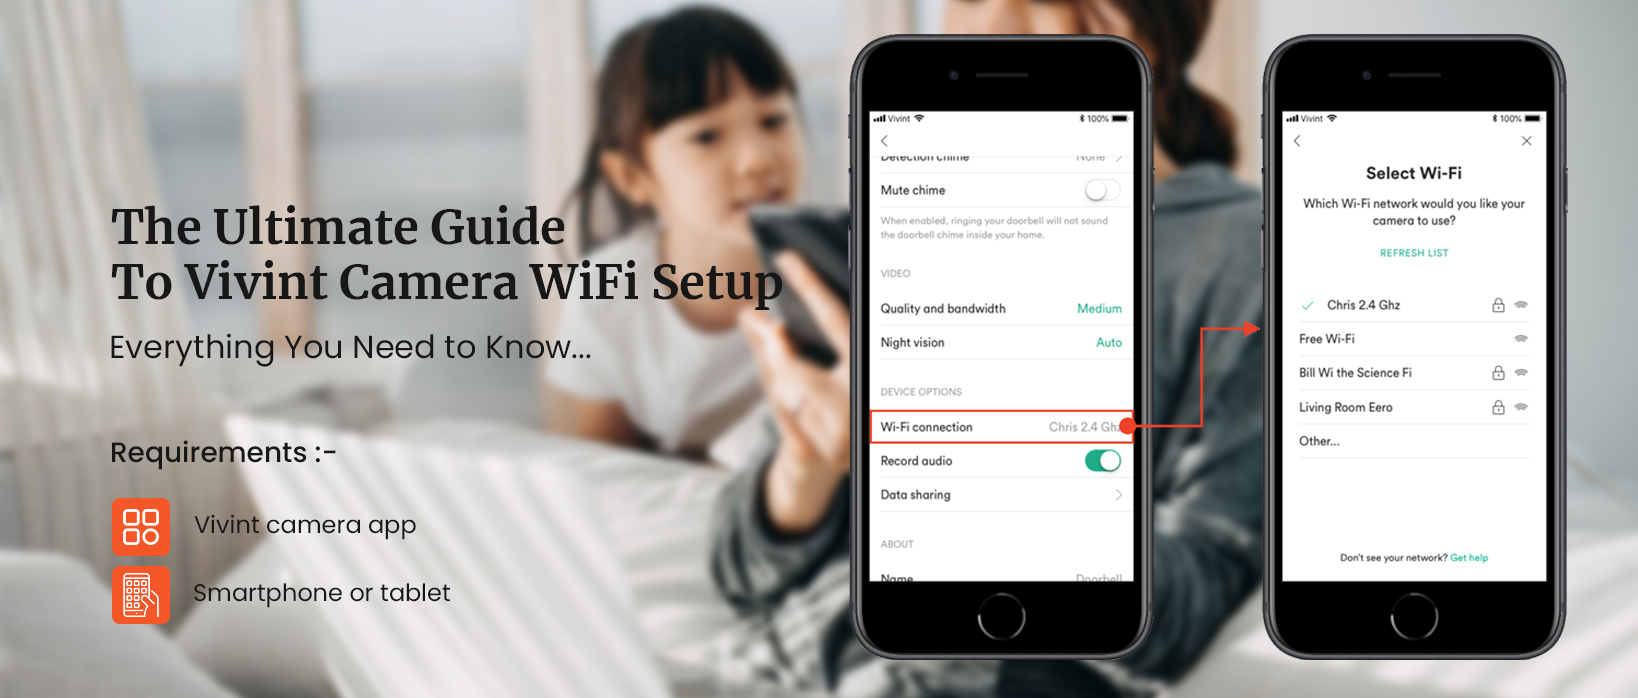 How to Connect Vivint Camera to WiFi